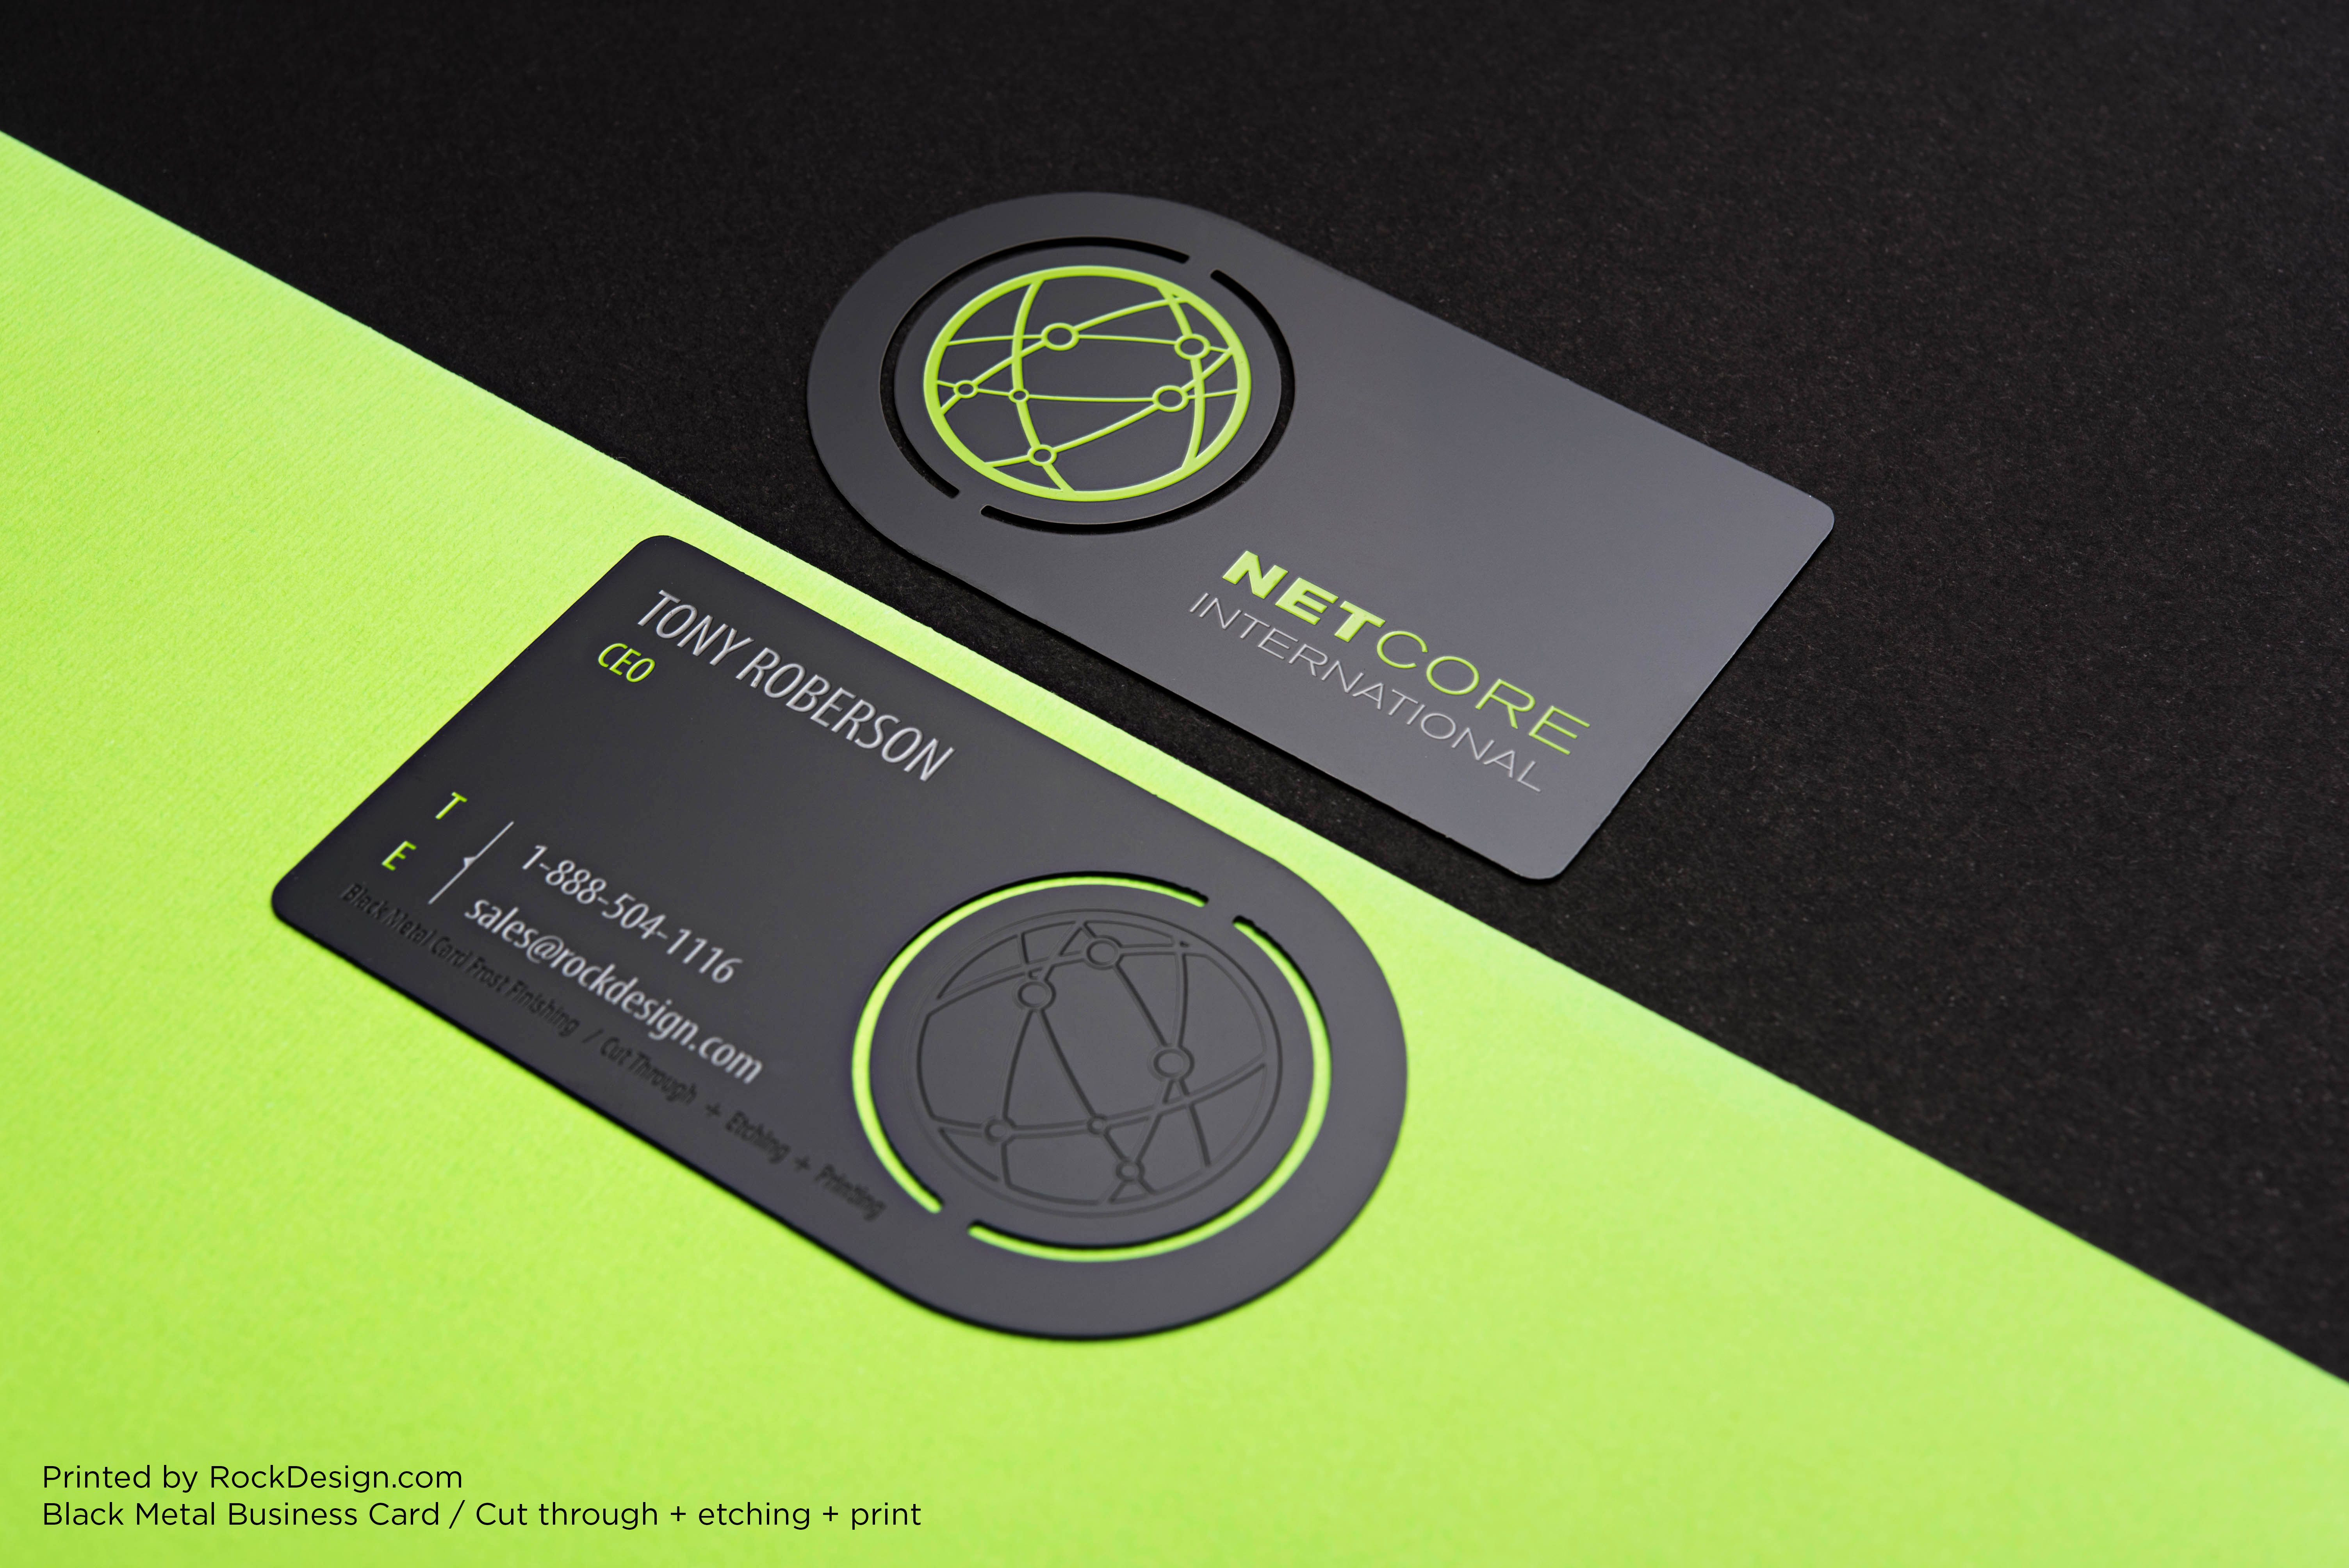 Metal Business Cards with Sleek Design Spot Colour Of Business Card Template for Printing